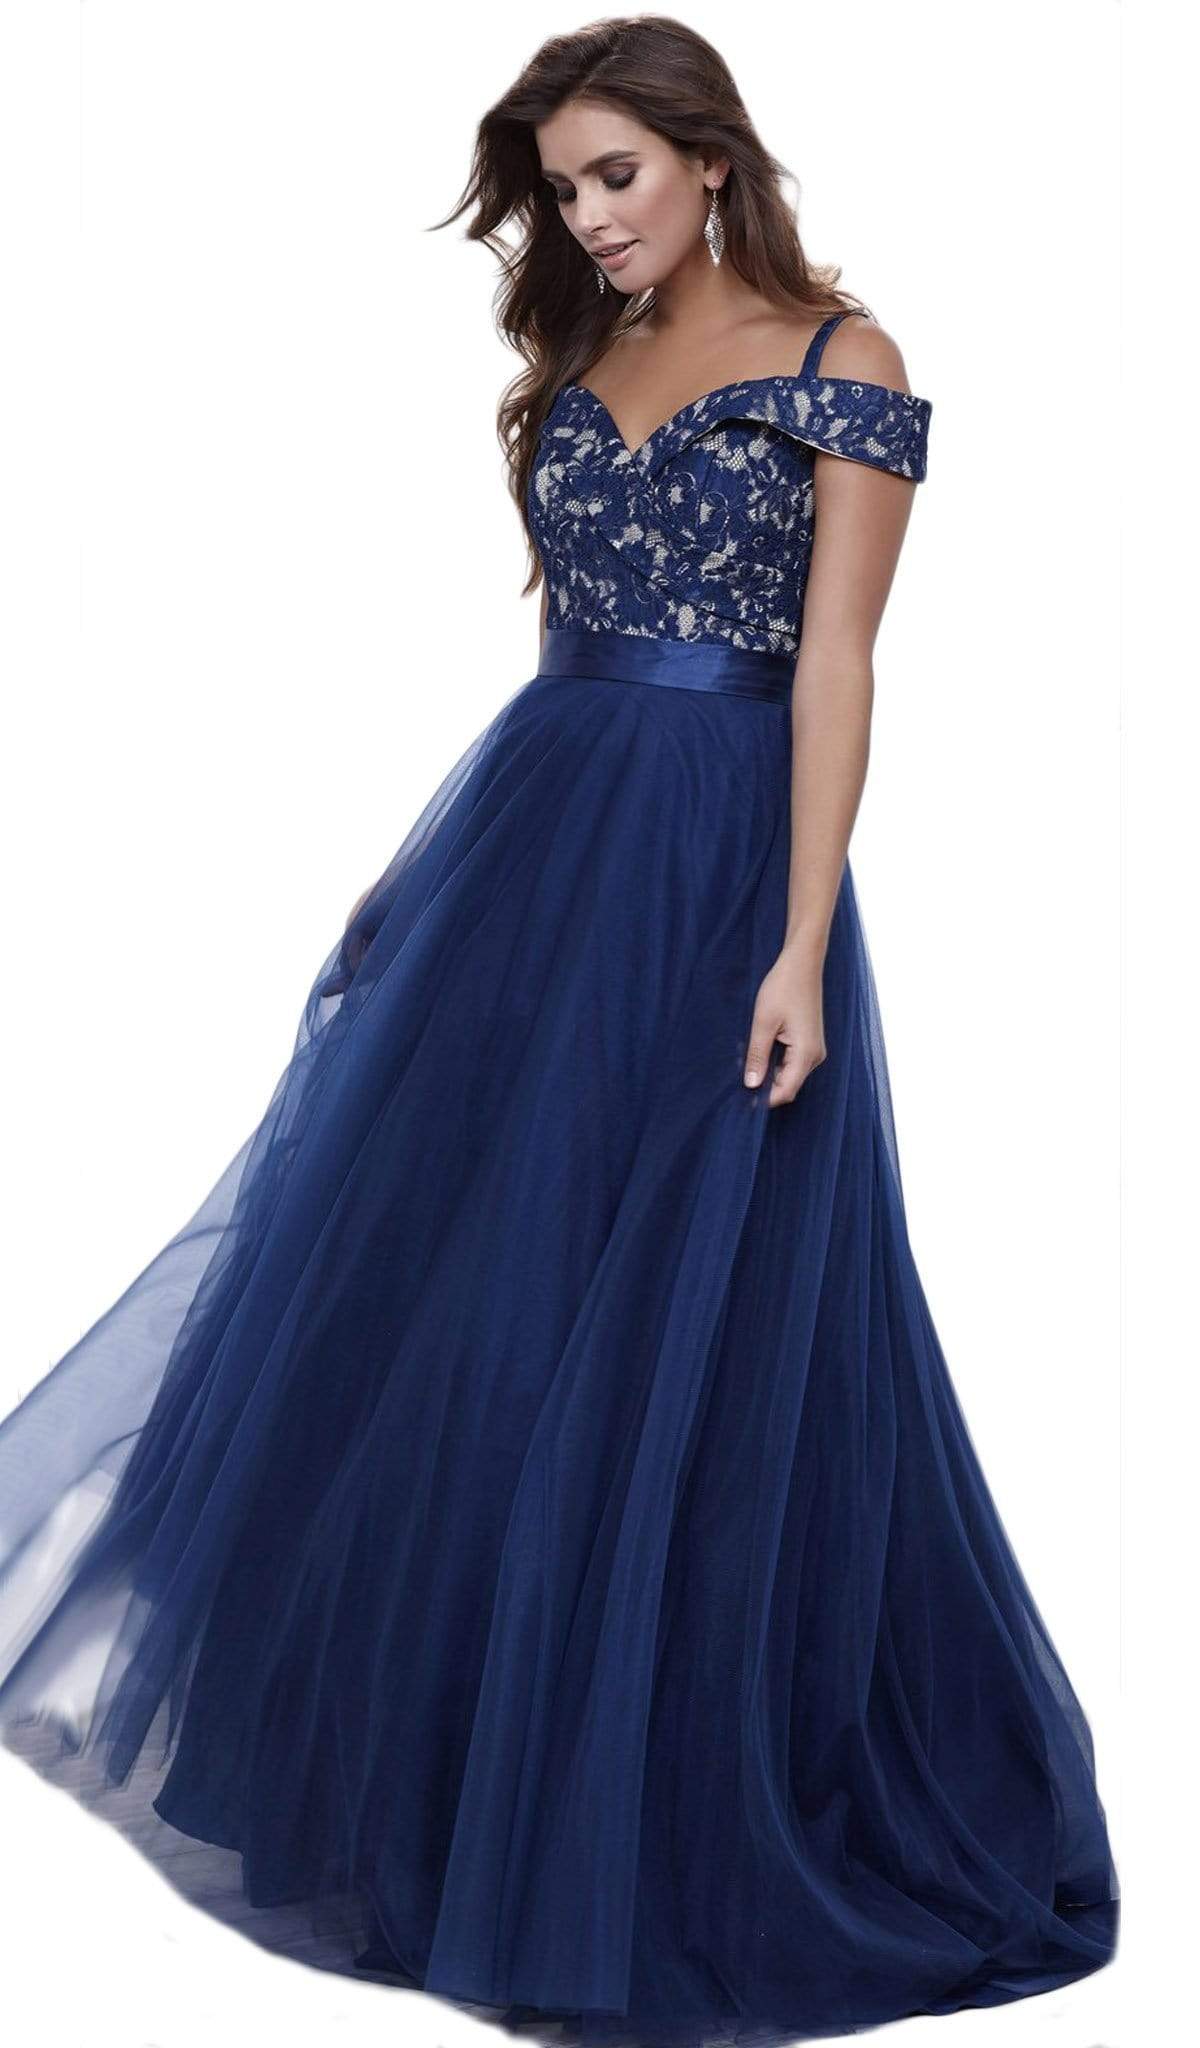 Nox Anabel - 8372 Lace Off-Shoulder Ballgown Special Occasion Dress XS / Navy